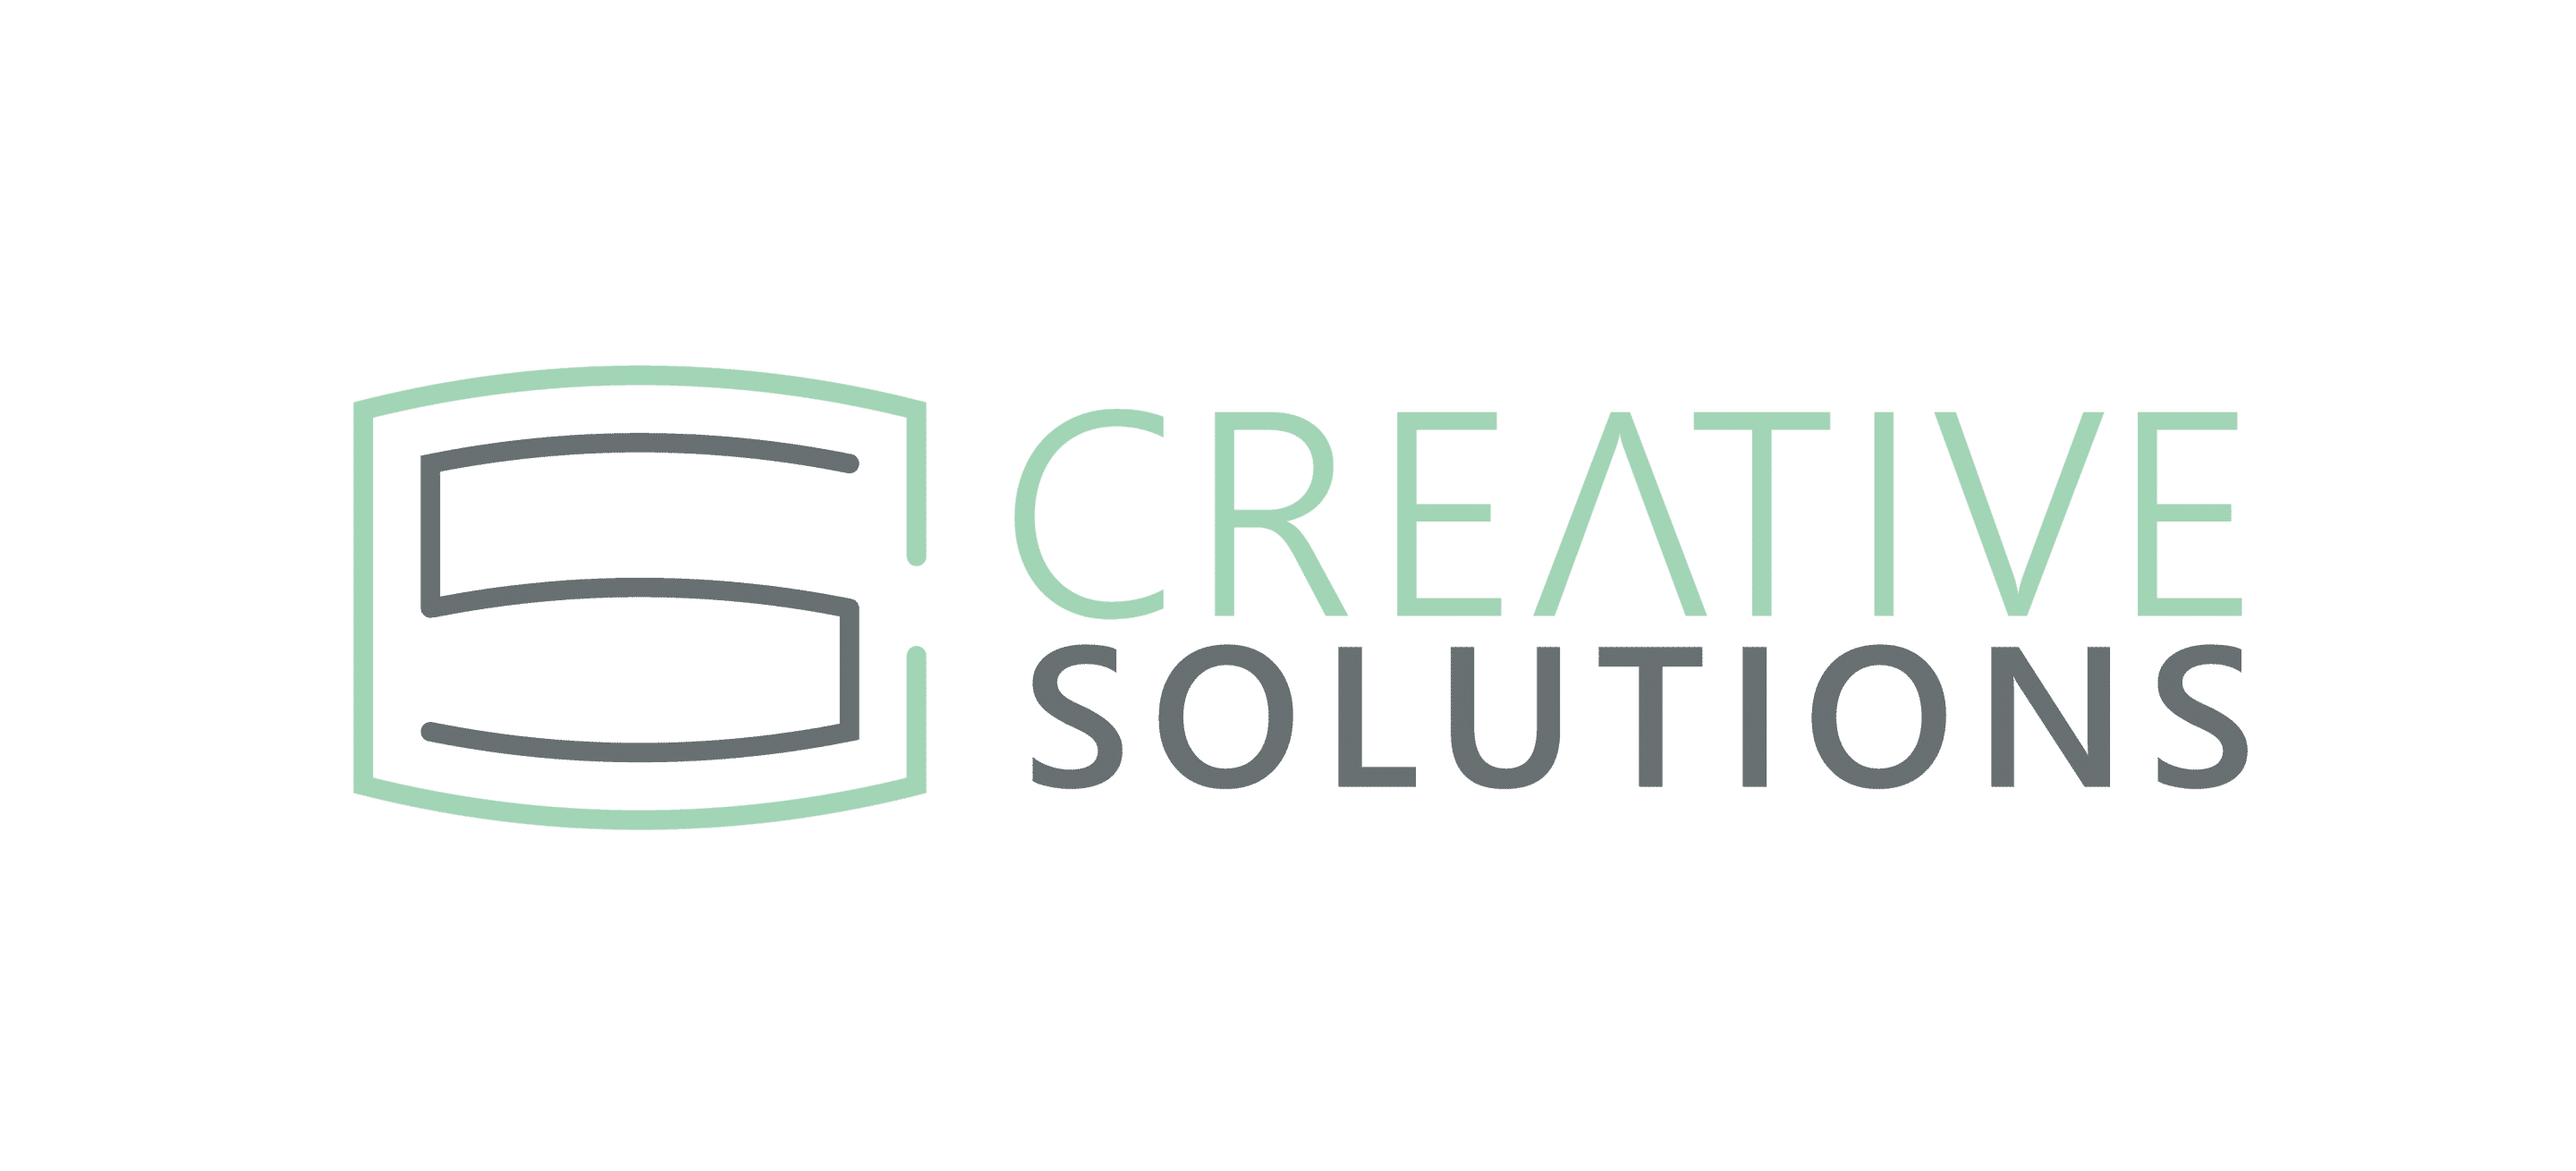 Creative Solutions Logo lrg - Digital Marketing Tools and Tips to build sustainability during COVID-19 - East Gwillimbury Chamber of Commerce